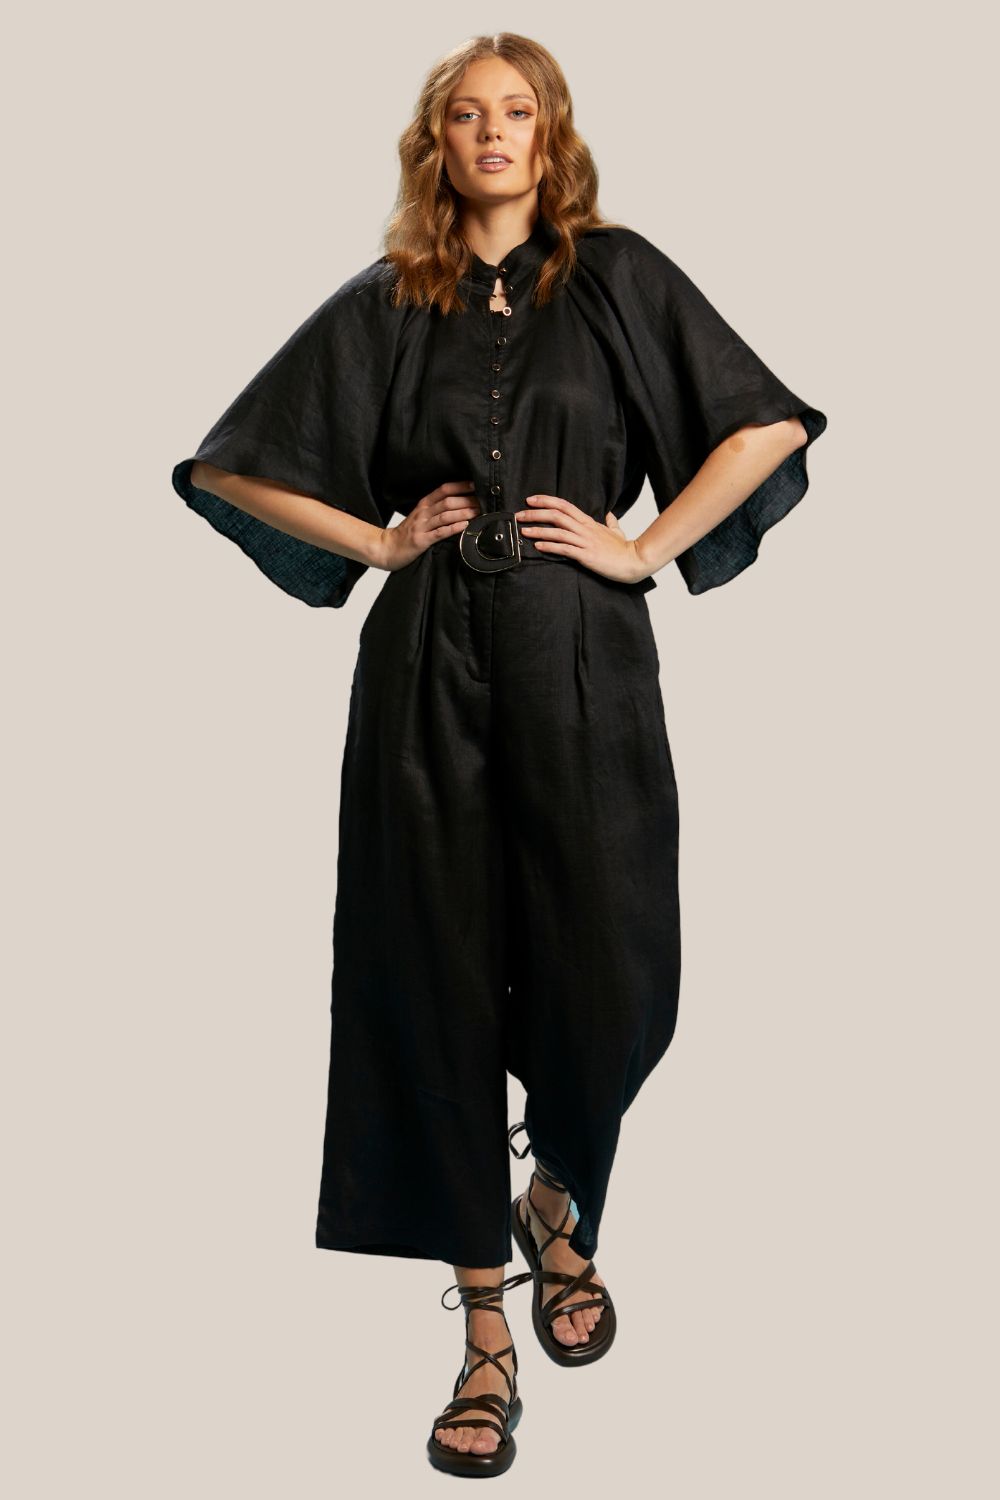 Fate + Becker Exhale Belted Wide Leg Pant